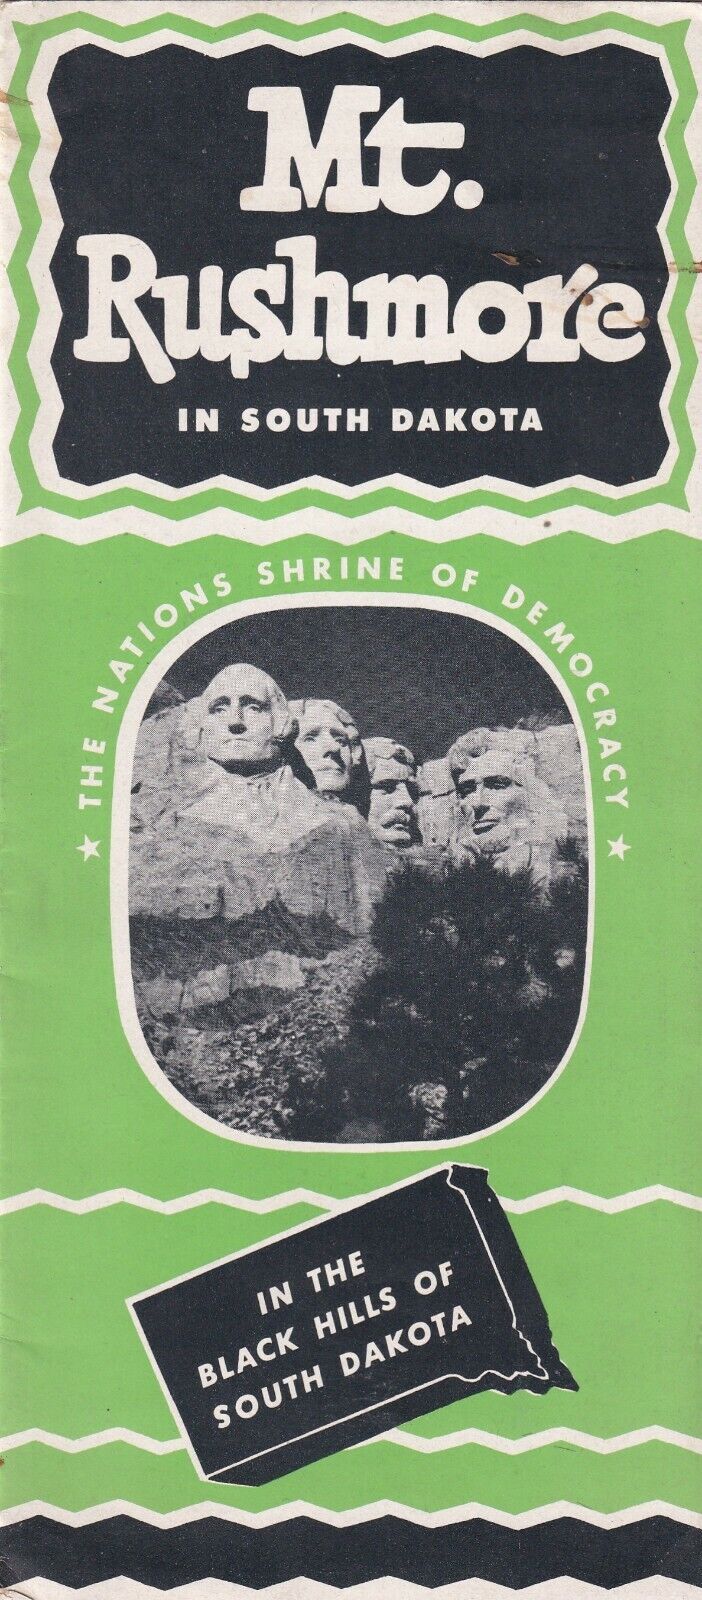 1950s South Dakota State Highway Commission Mt Rushmore Advertising Brochure 